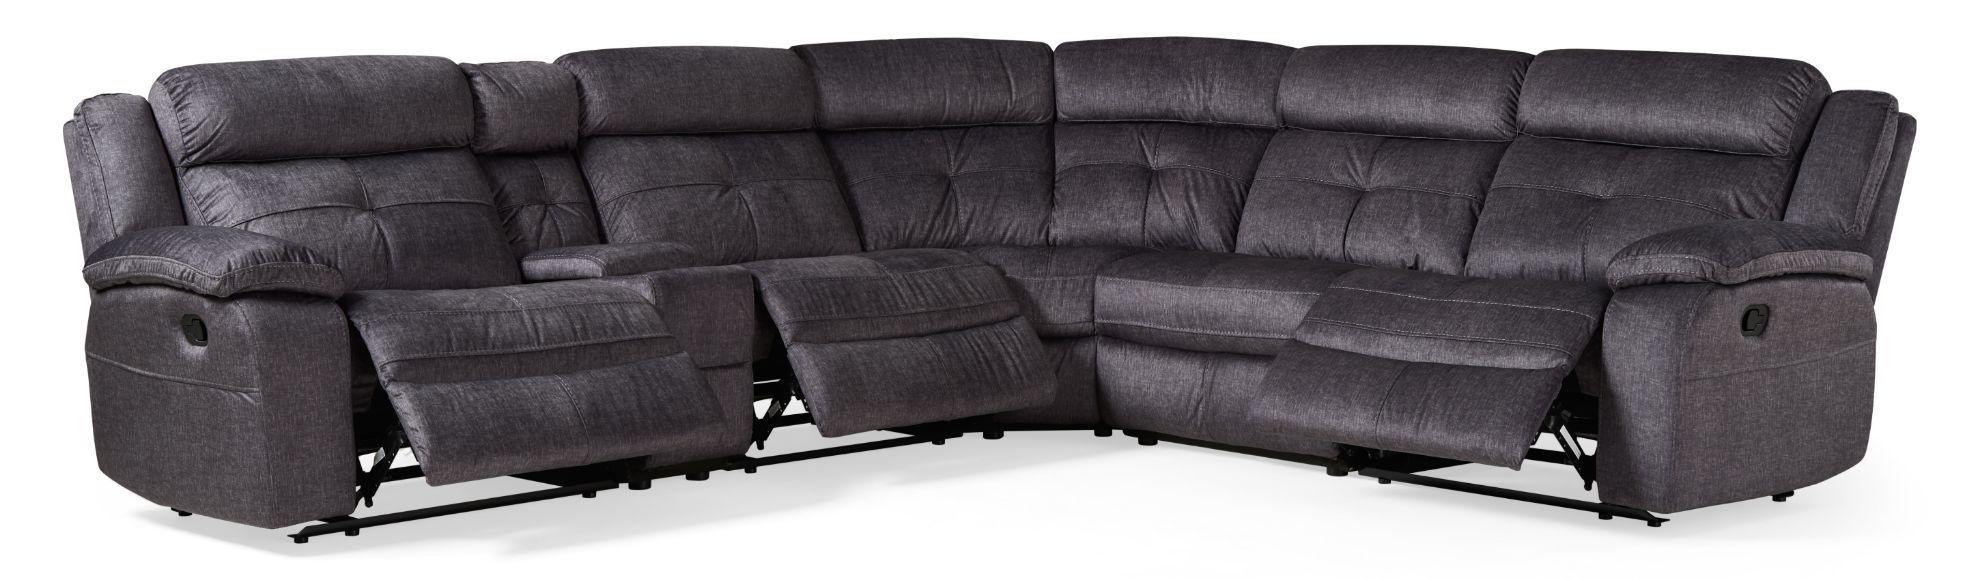 Picture of Blake 6pc Reclining Sectional